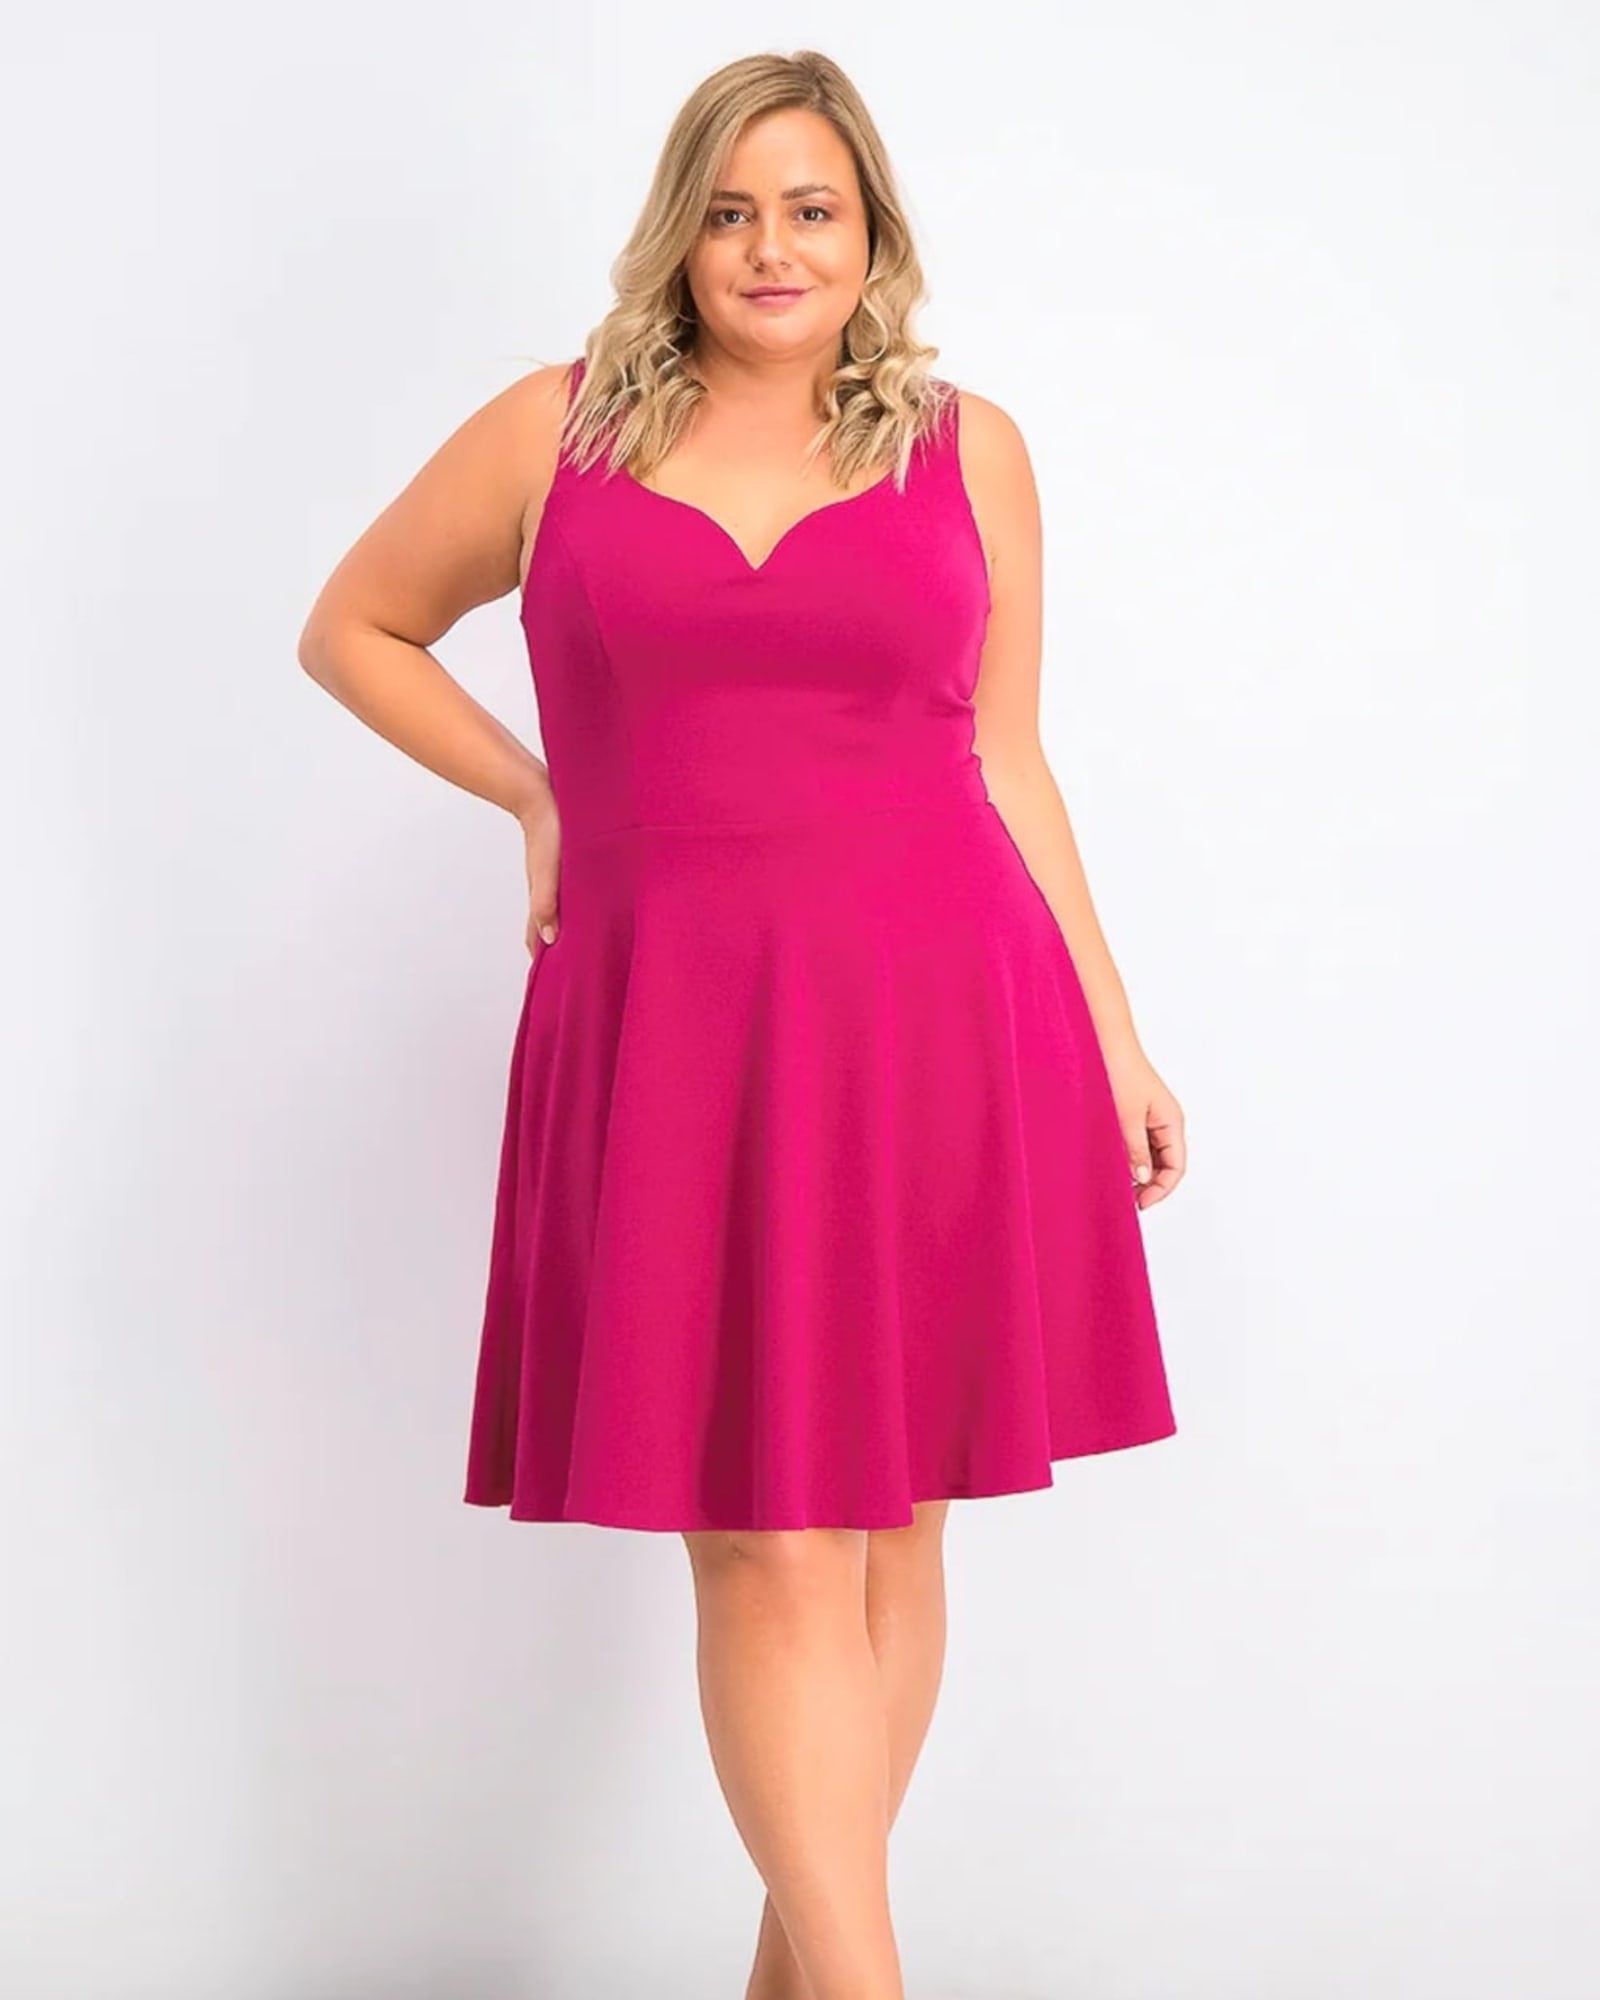 Lindsey Duster - Peach Coral  Plus size outfits, Plus size fashion, Style